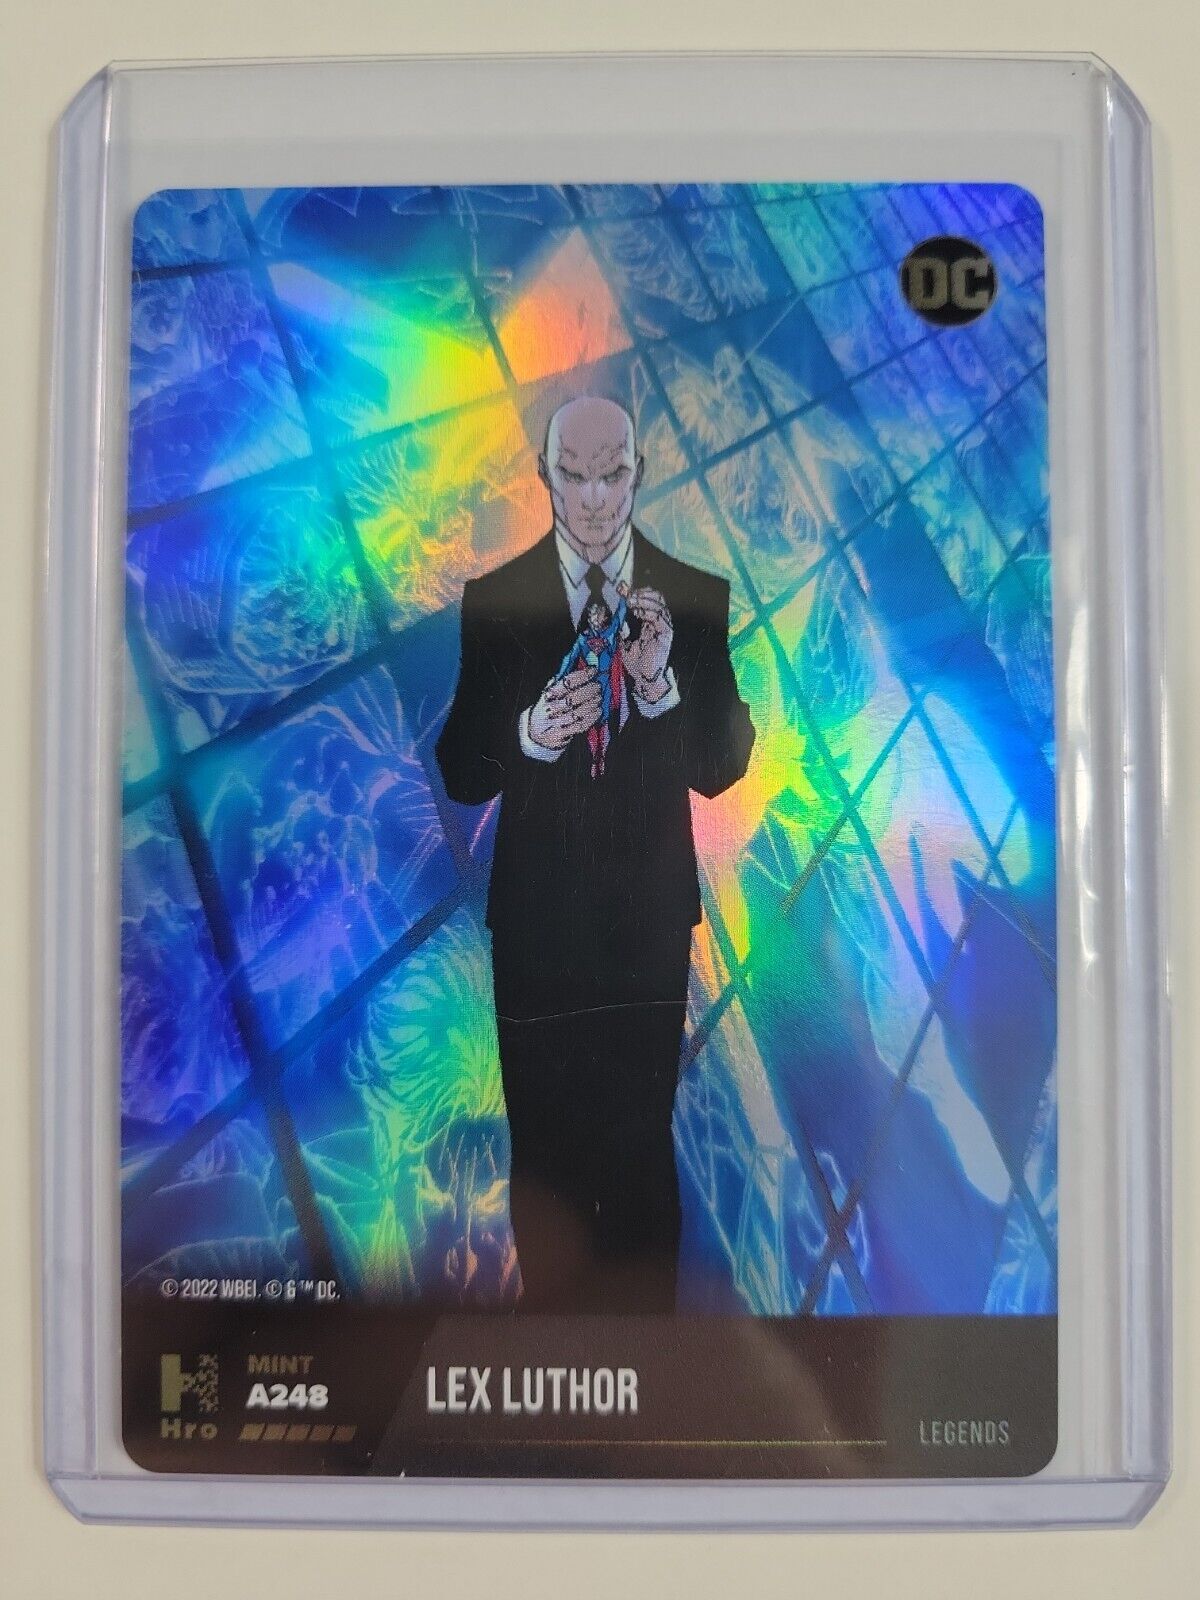 DC Hybrid Trading Cards - Physical Card Only - Lex Luther A248